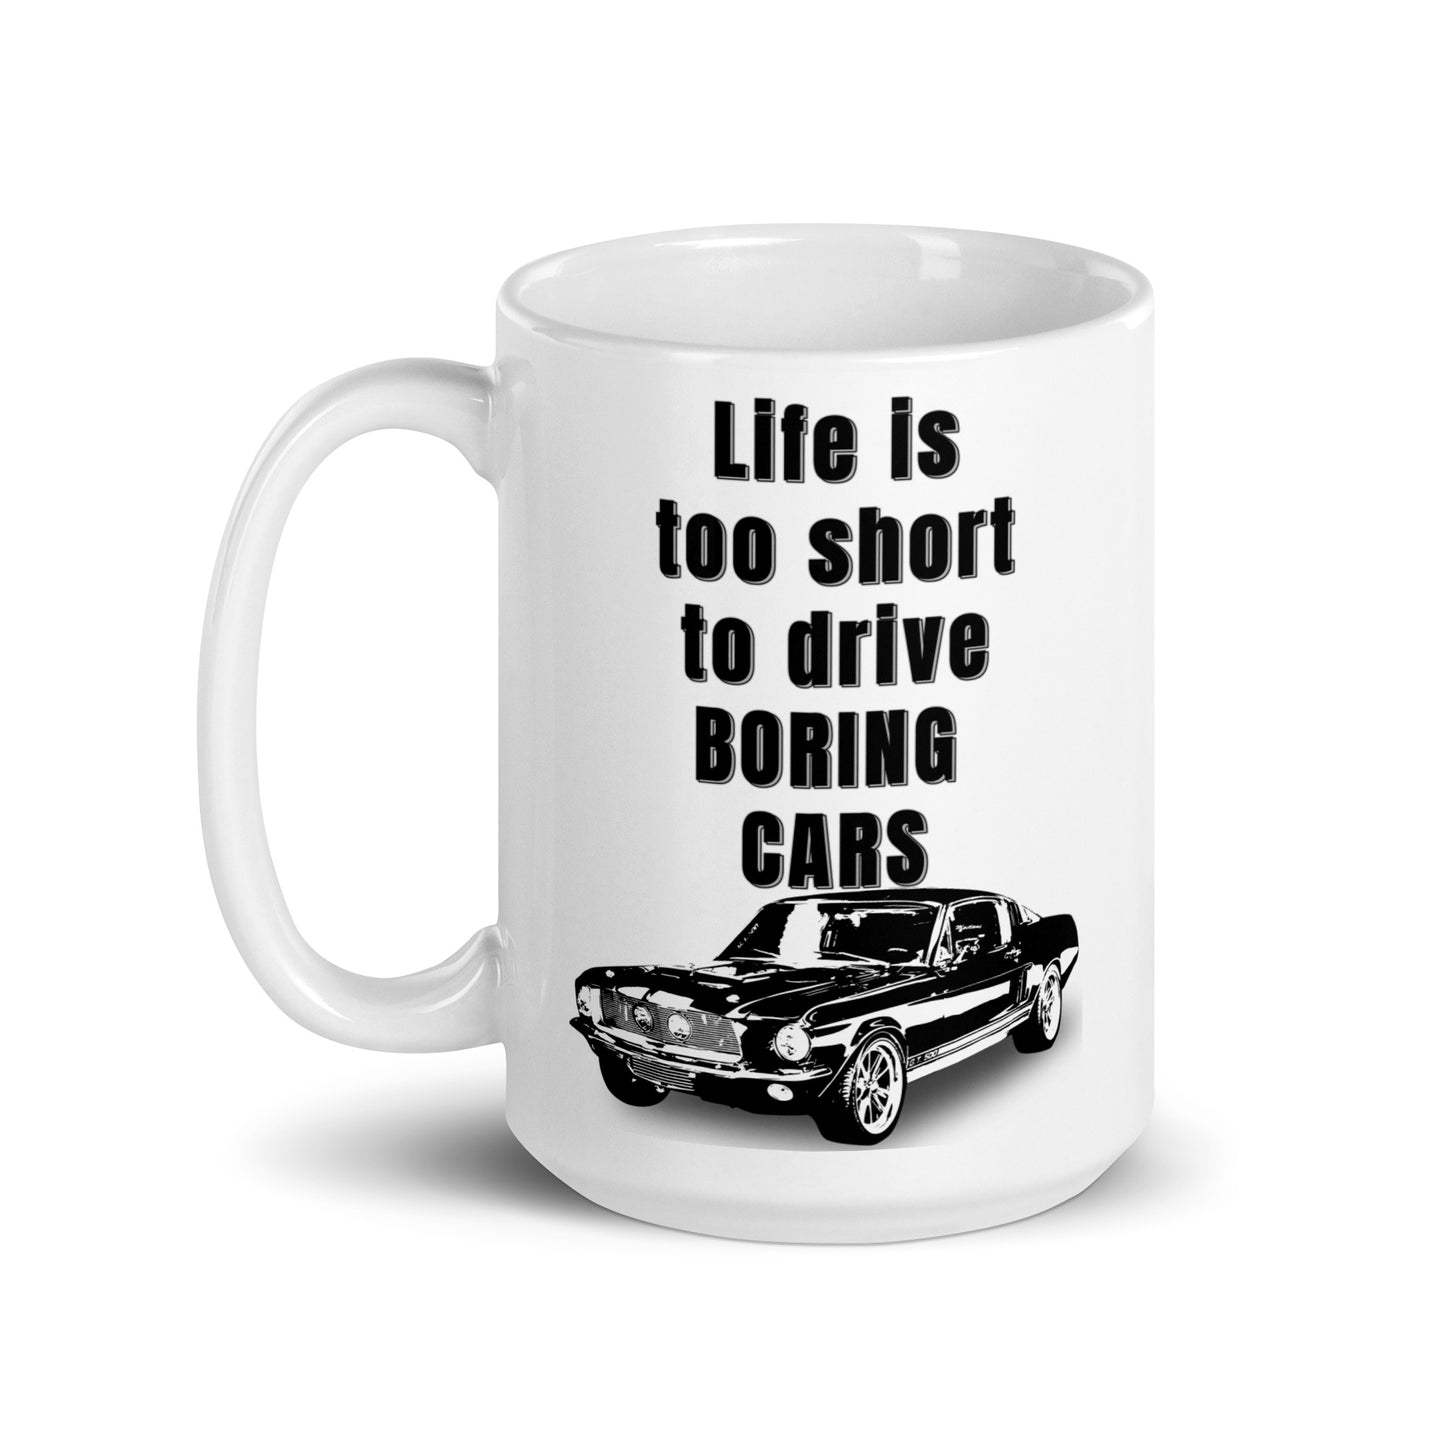 Life is too short to drive BORING cars 1967 Ford-Shelby GT 500 Mug 1967 ford shelby Caffeine classic car Coffee Addiction Coffee Beans Coffee Break Coffee Humor Coffee is Life Coffee Lover Coffee Shop Coffee Snob Coffee Time Espresso Funny Quotes Humor Java Keep Calm and Drink Coffee Latte Mocha Morning muscle car Mustang Procaffeinating shelby Wordplay